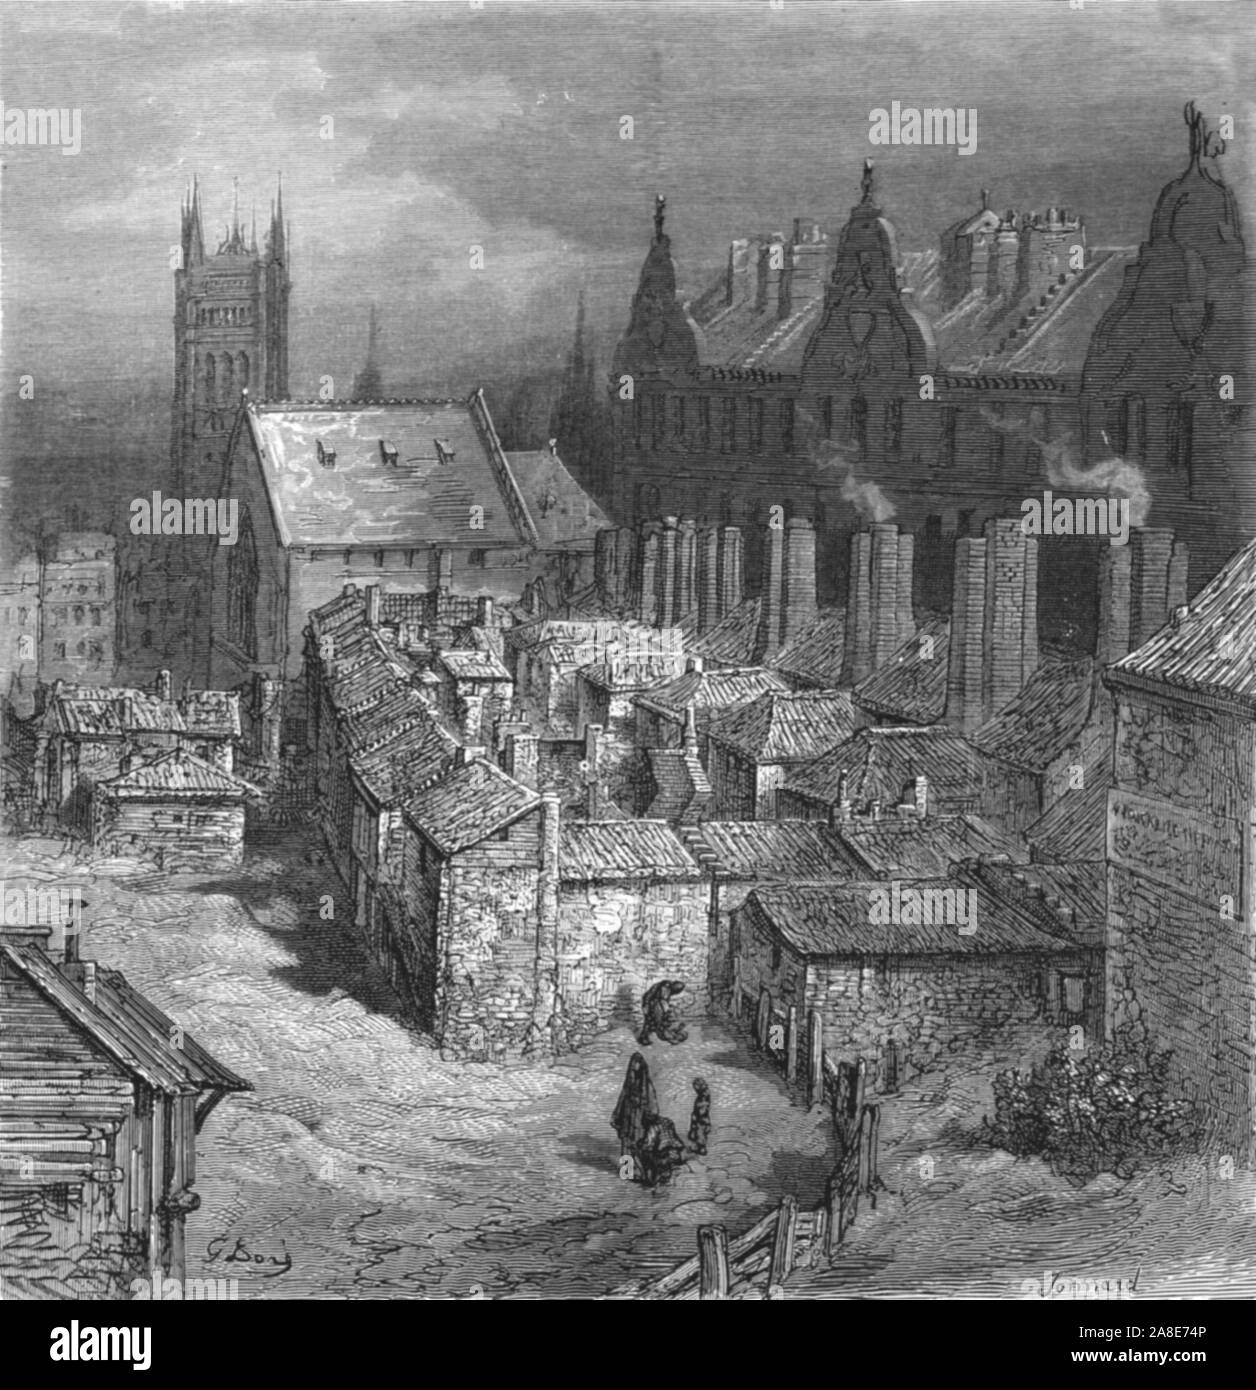 The Devils Acre-Westminster', 1872. Devil's Acre, a Victorian slum near  Westminster Abbey had a high rate of mortality from diseases such as  typhoid. From, &quot;LONDON. A Pilgrimage&quot; by Gustave Dore and  Blanchard